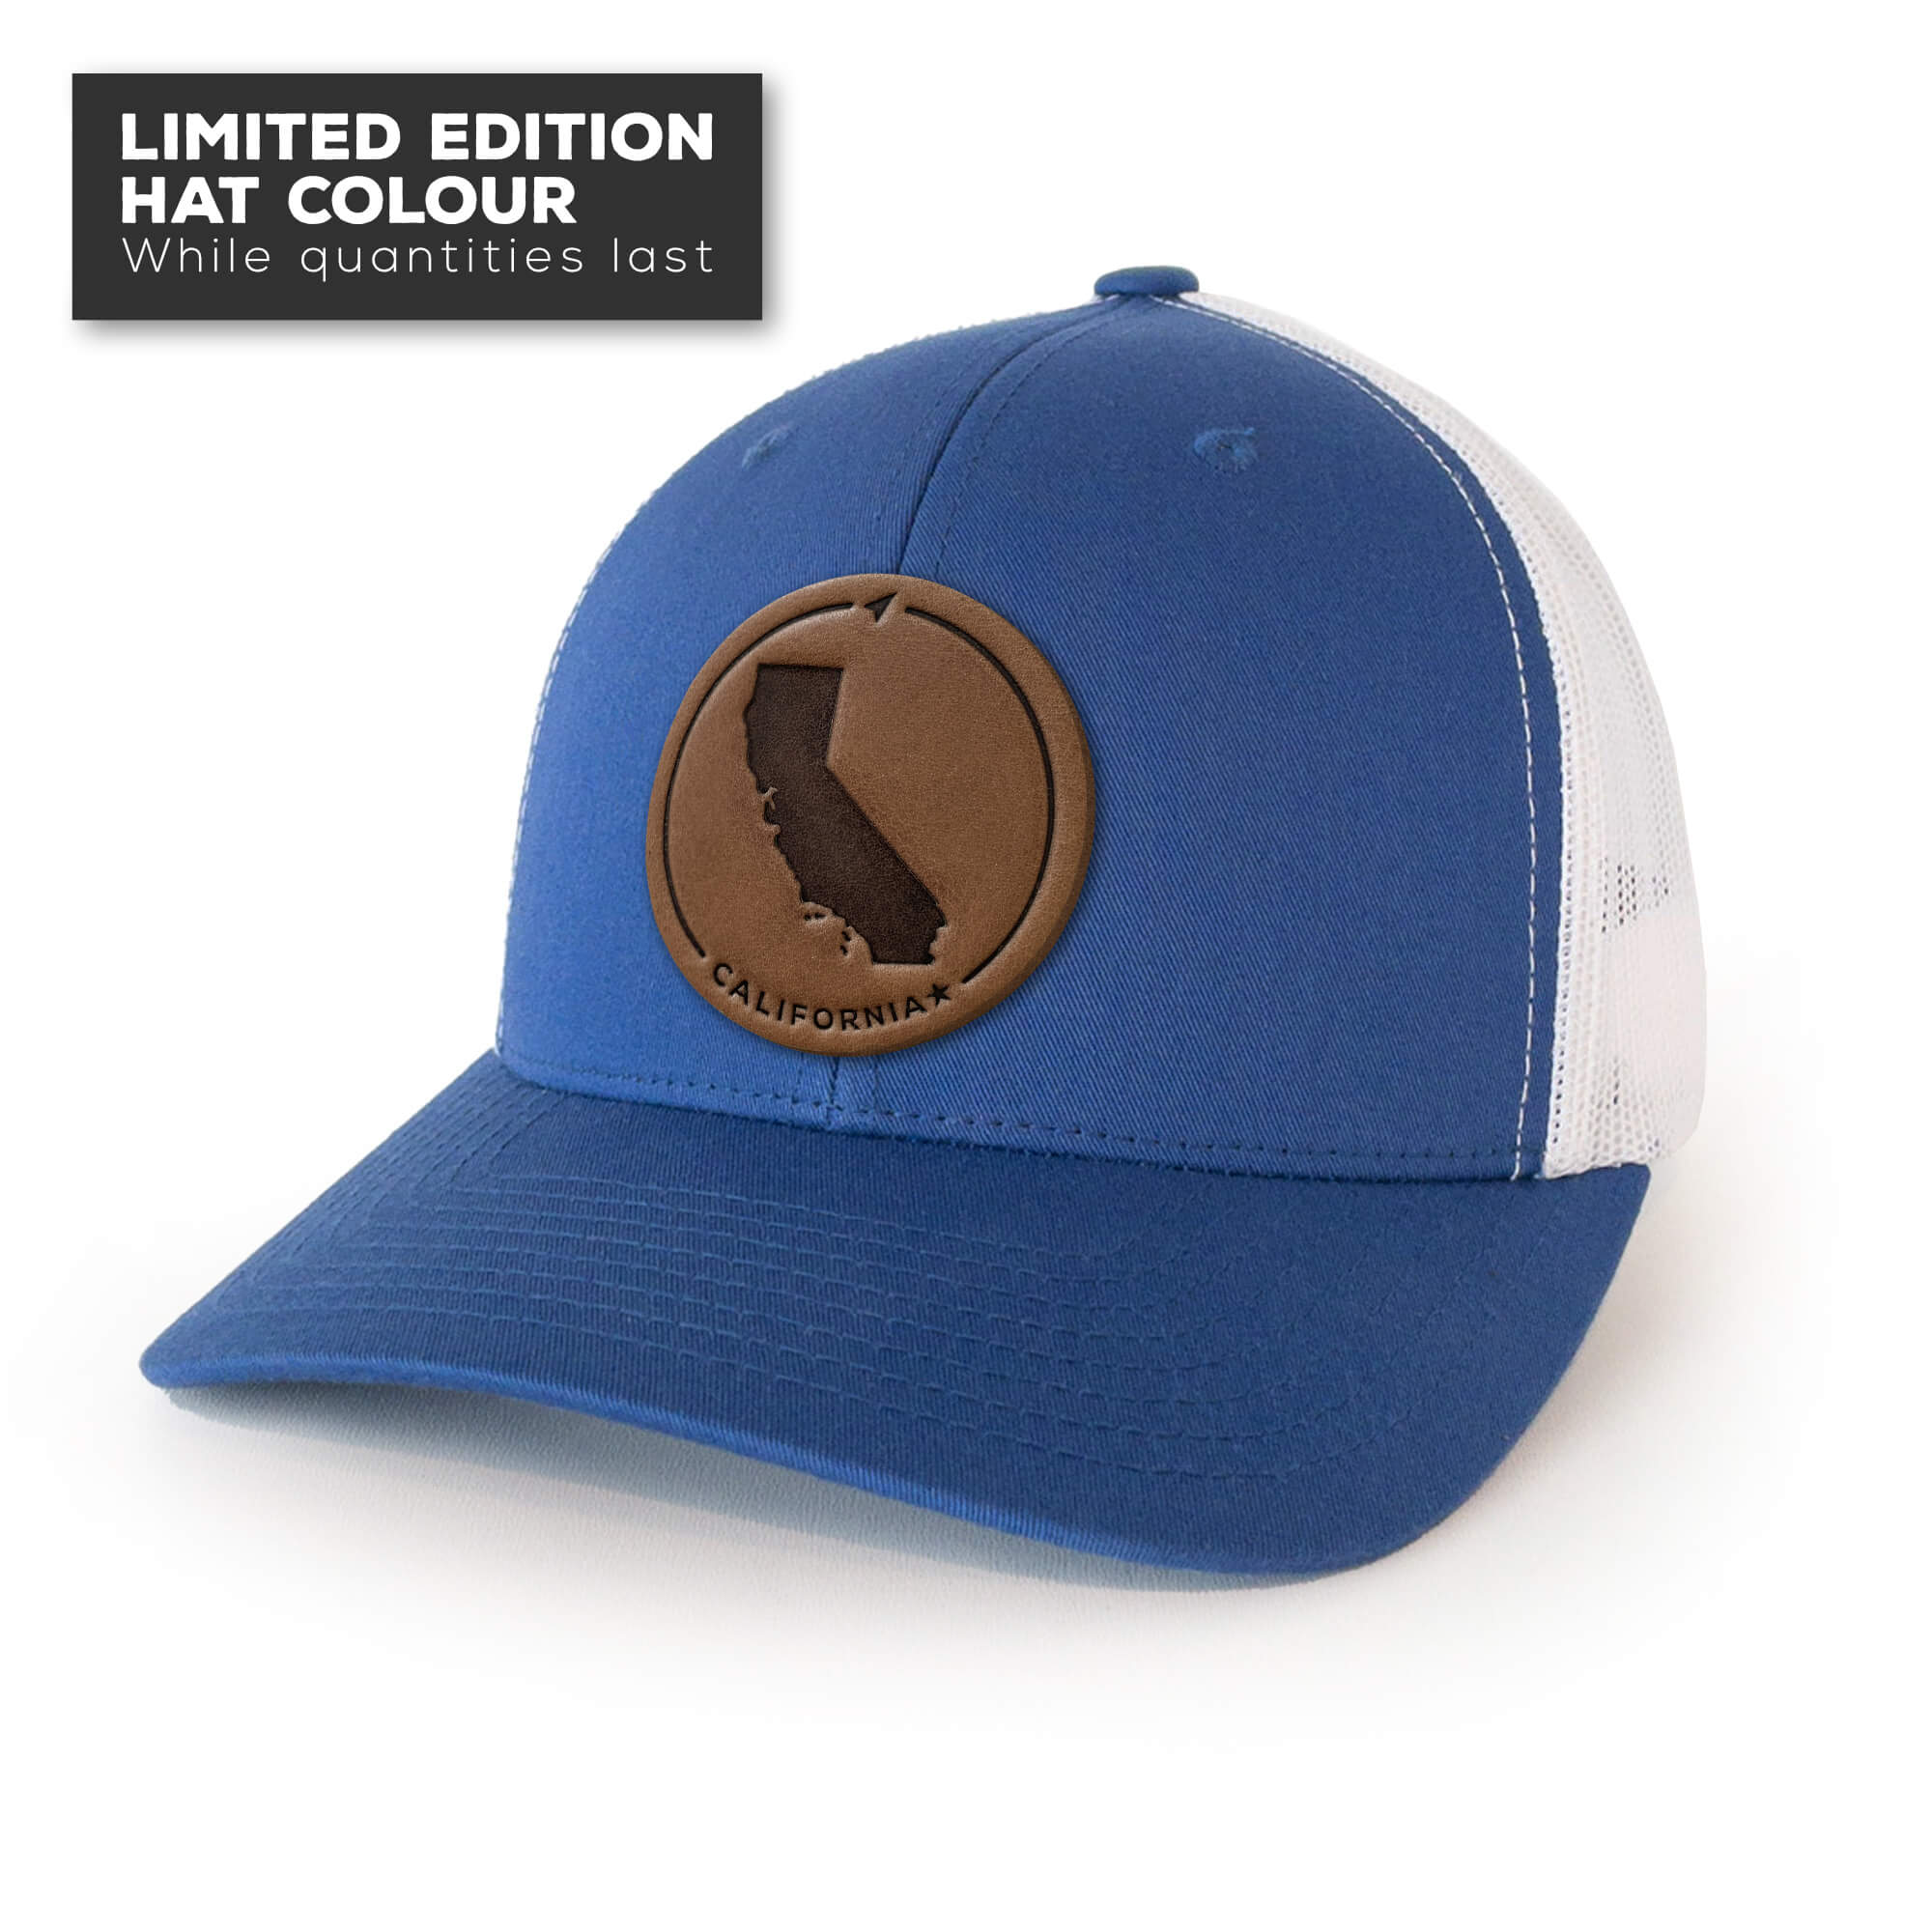 Royal Blue trucker hat with full-grain leather patch of California